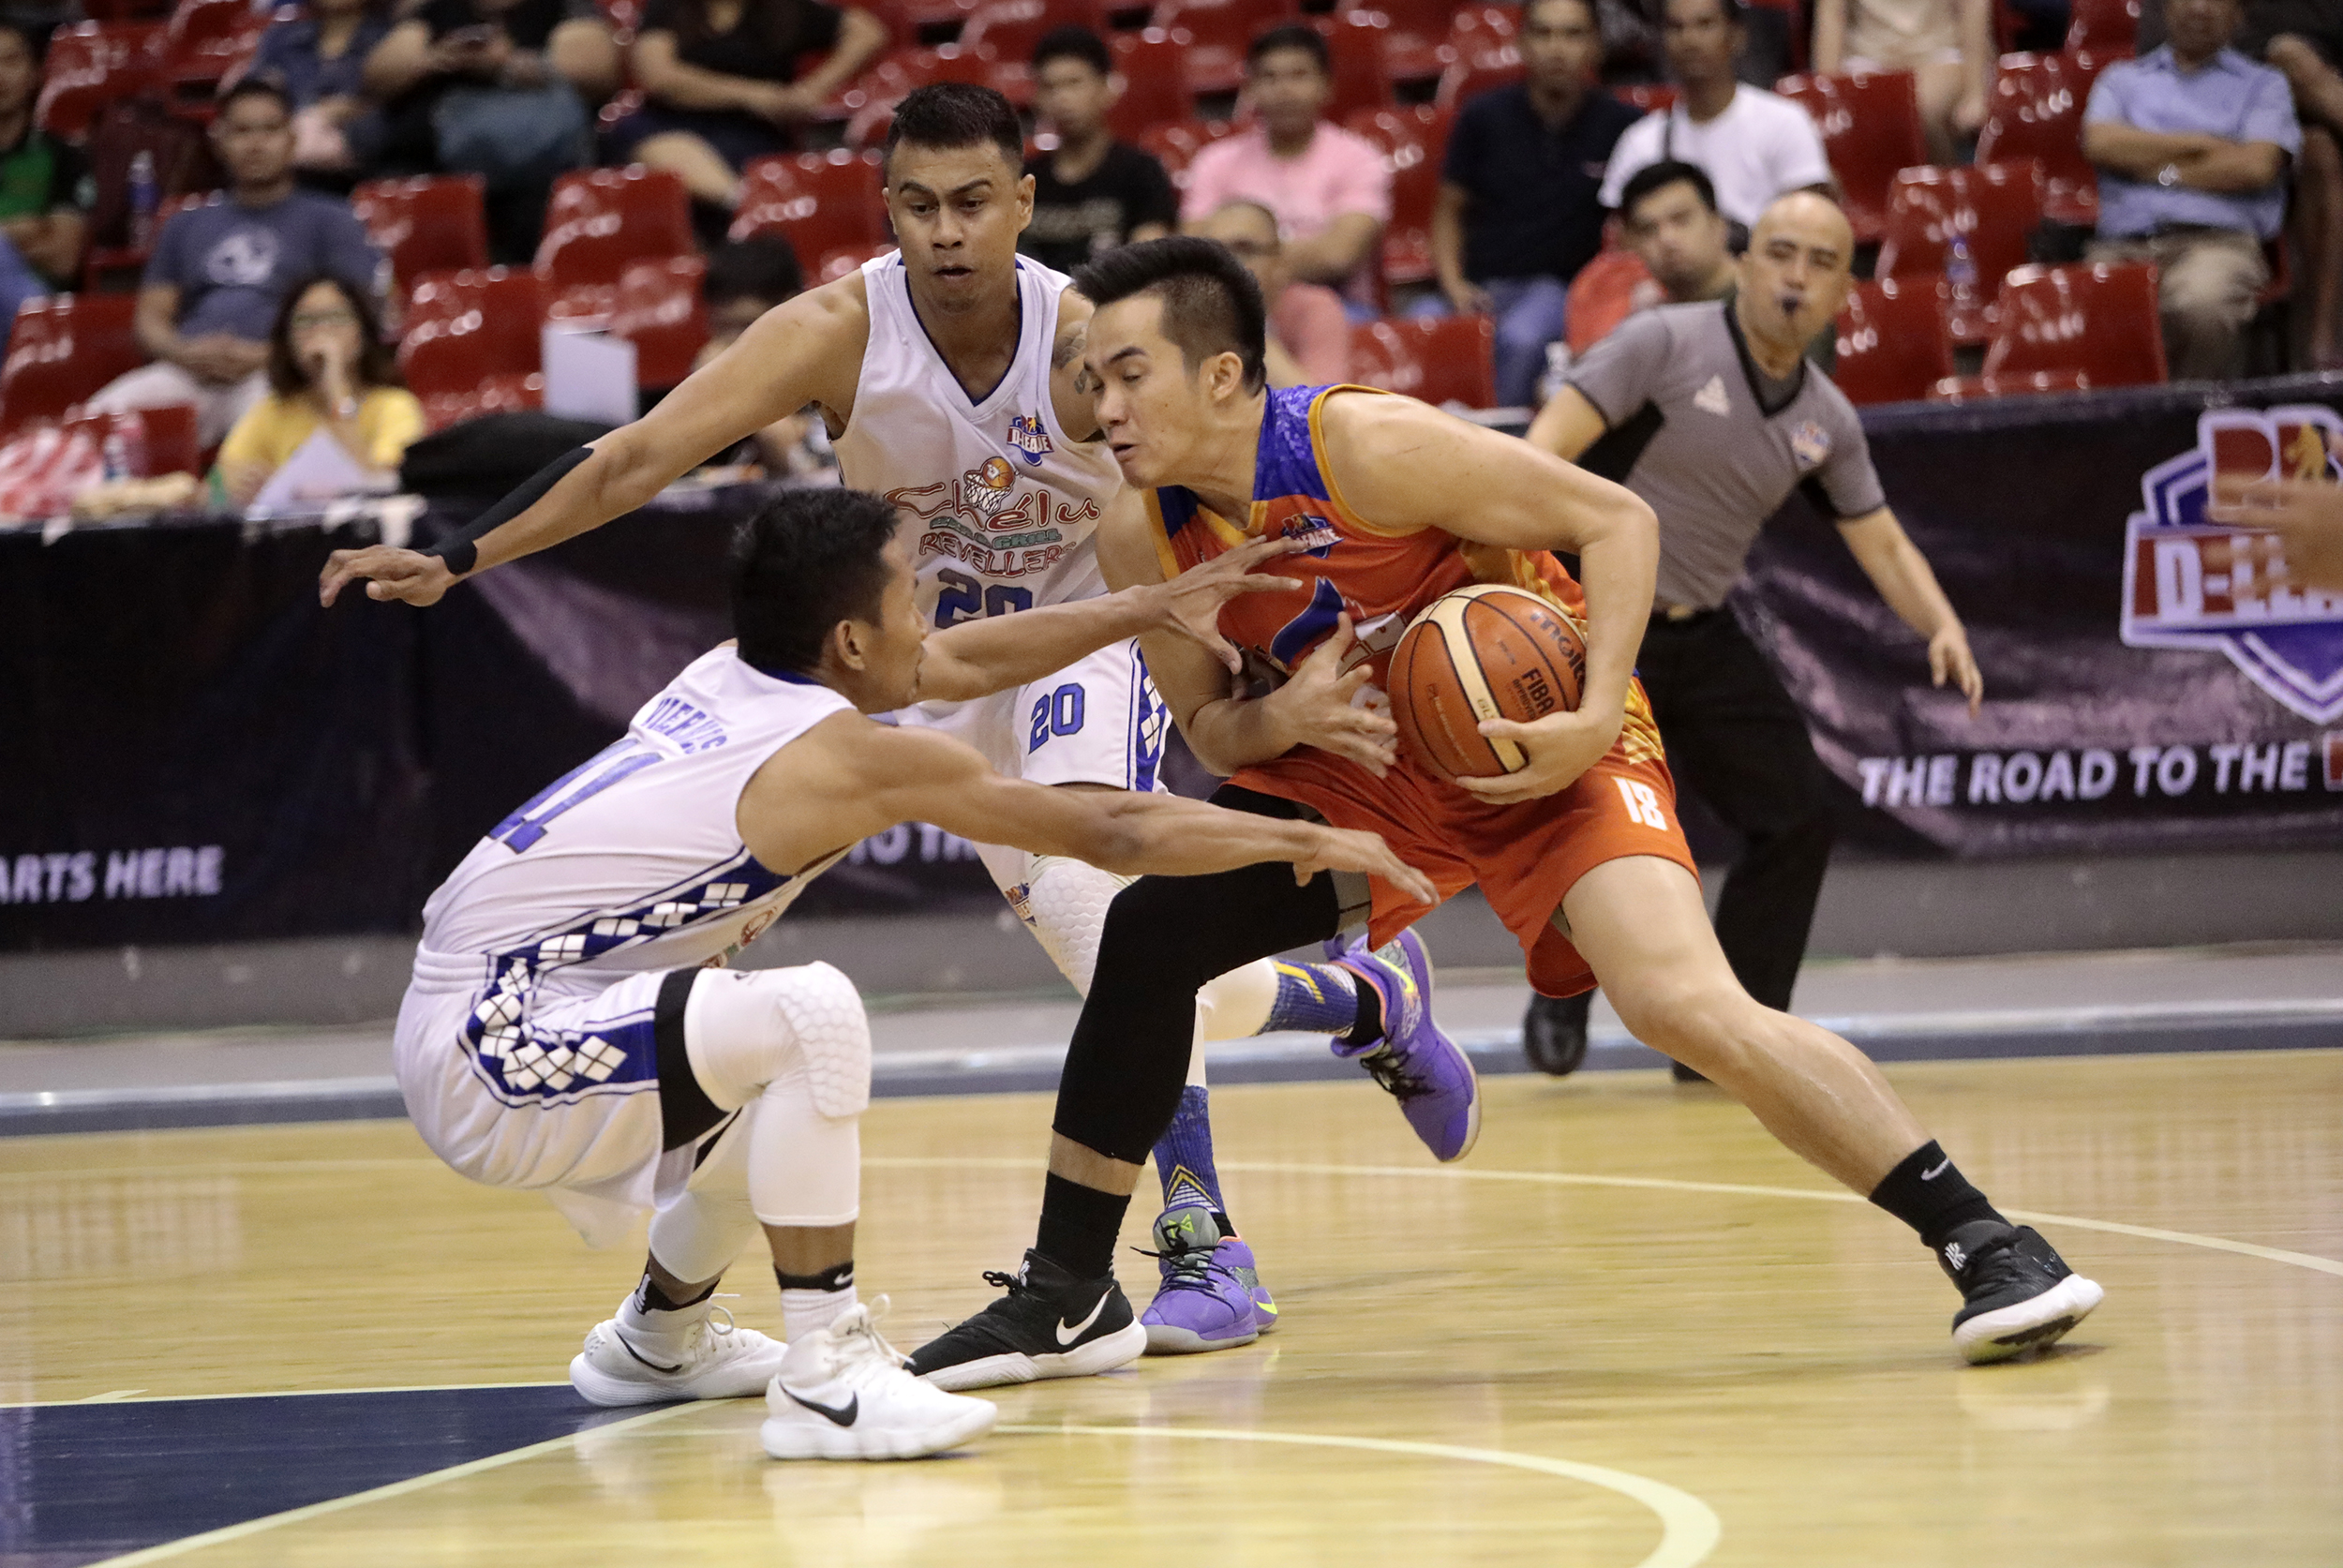 Paul Desiderio delivers as Go for Gold takes 2-1 lead